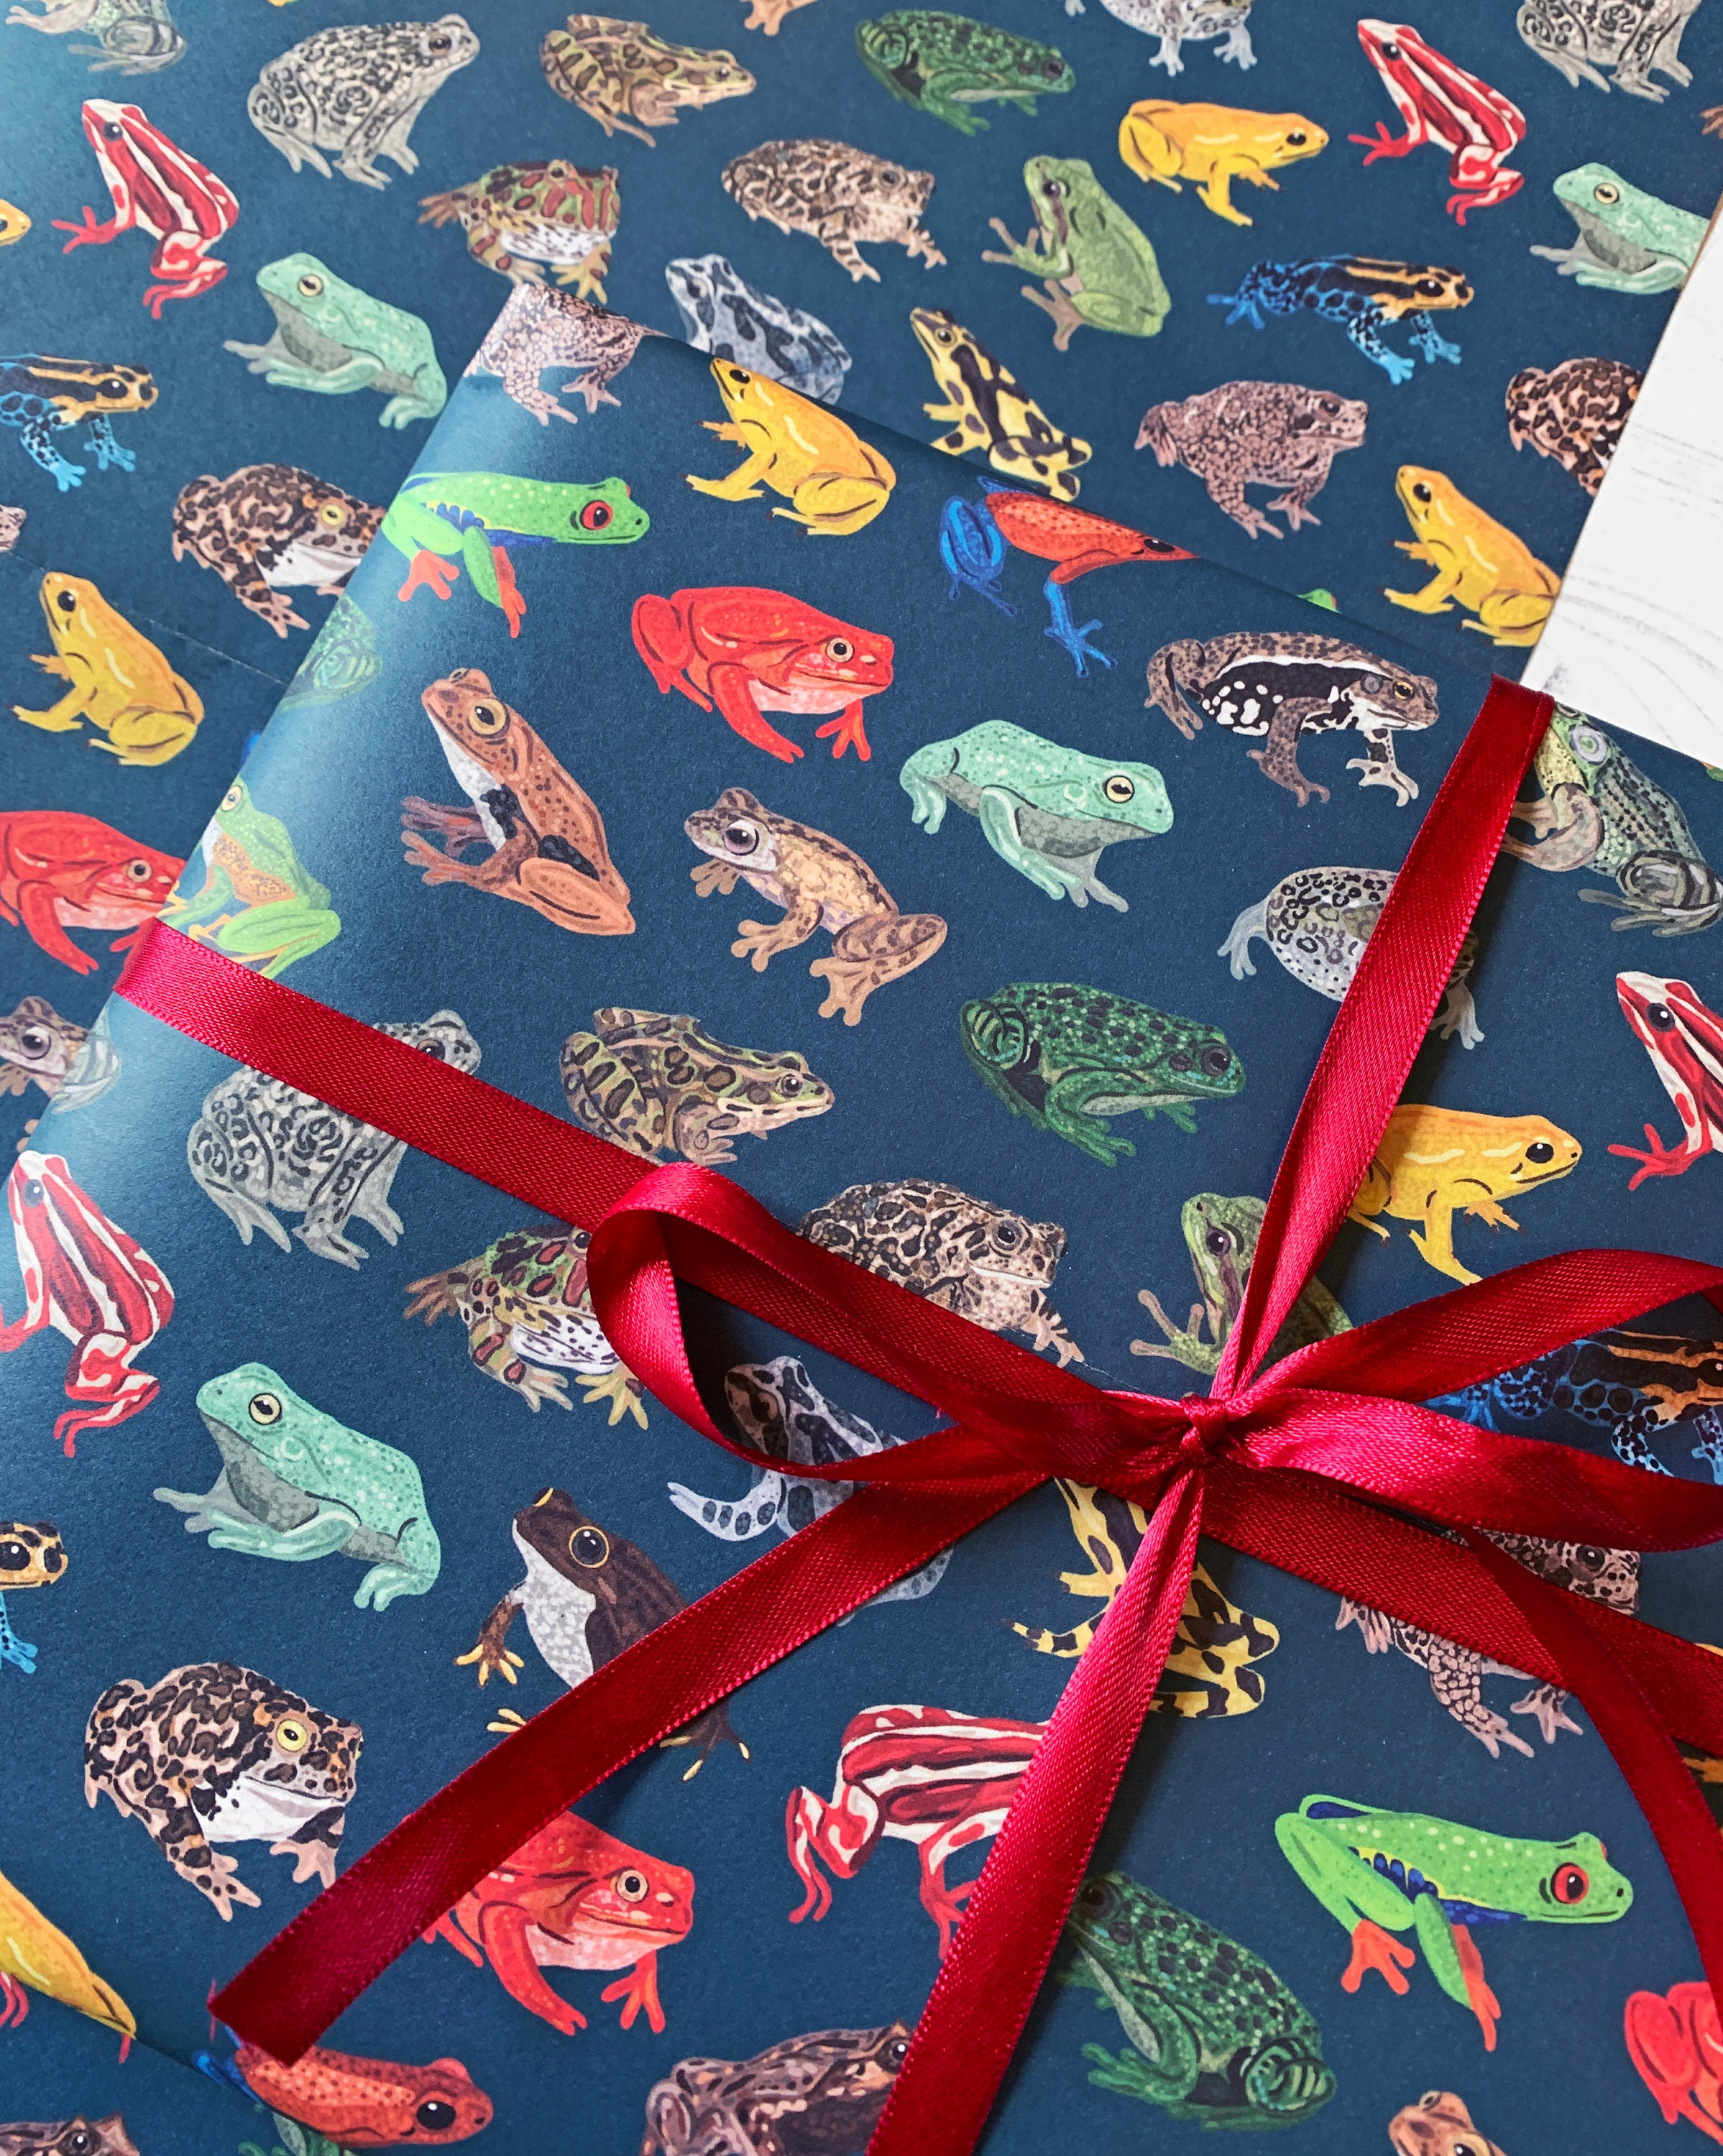 Frog Wrapping Paper, Frogs and toads gift wrap, frog gift